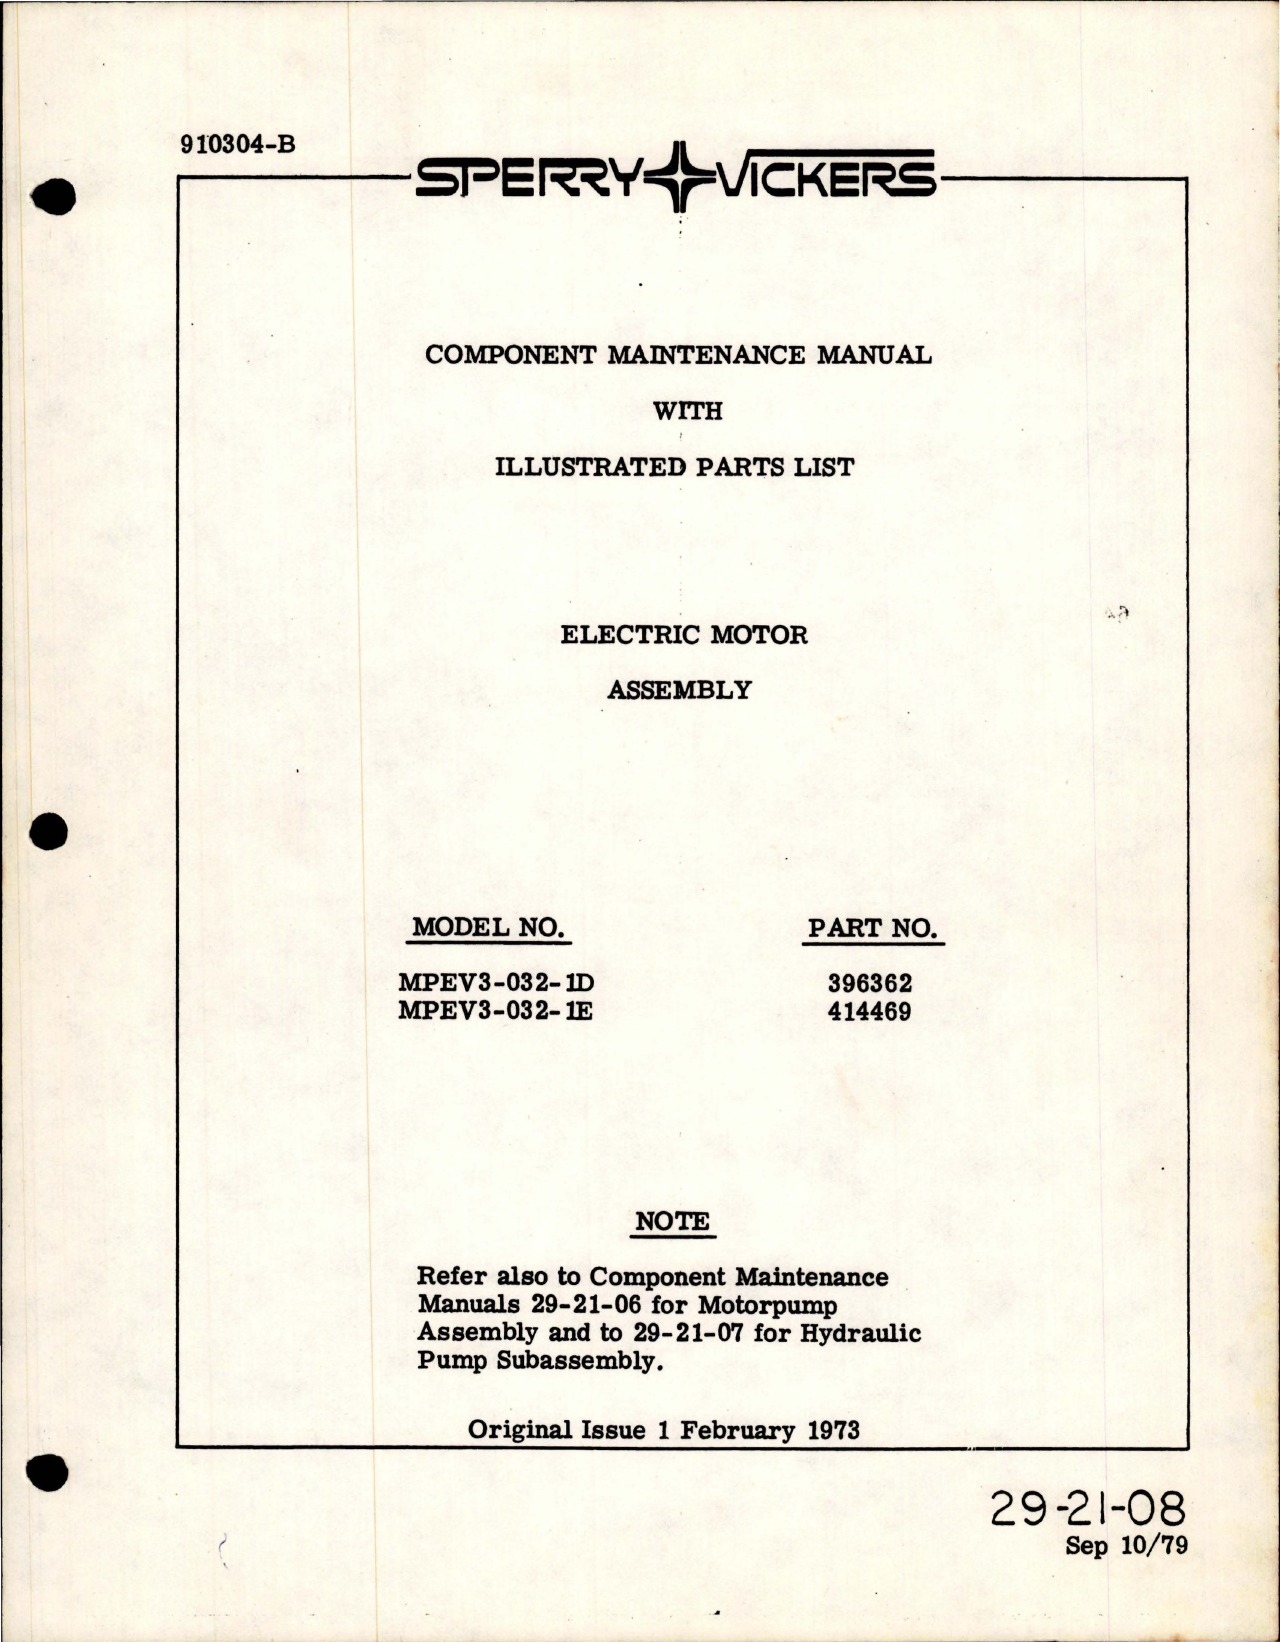 Sample page 1 from AirCorps Library document: Component Maintenance Manual for Electric Motor - Part 396362 and 414469